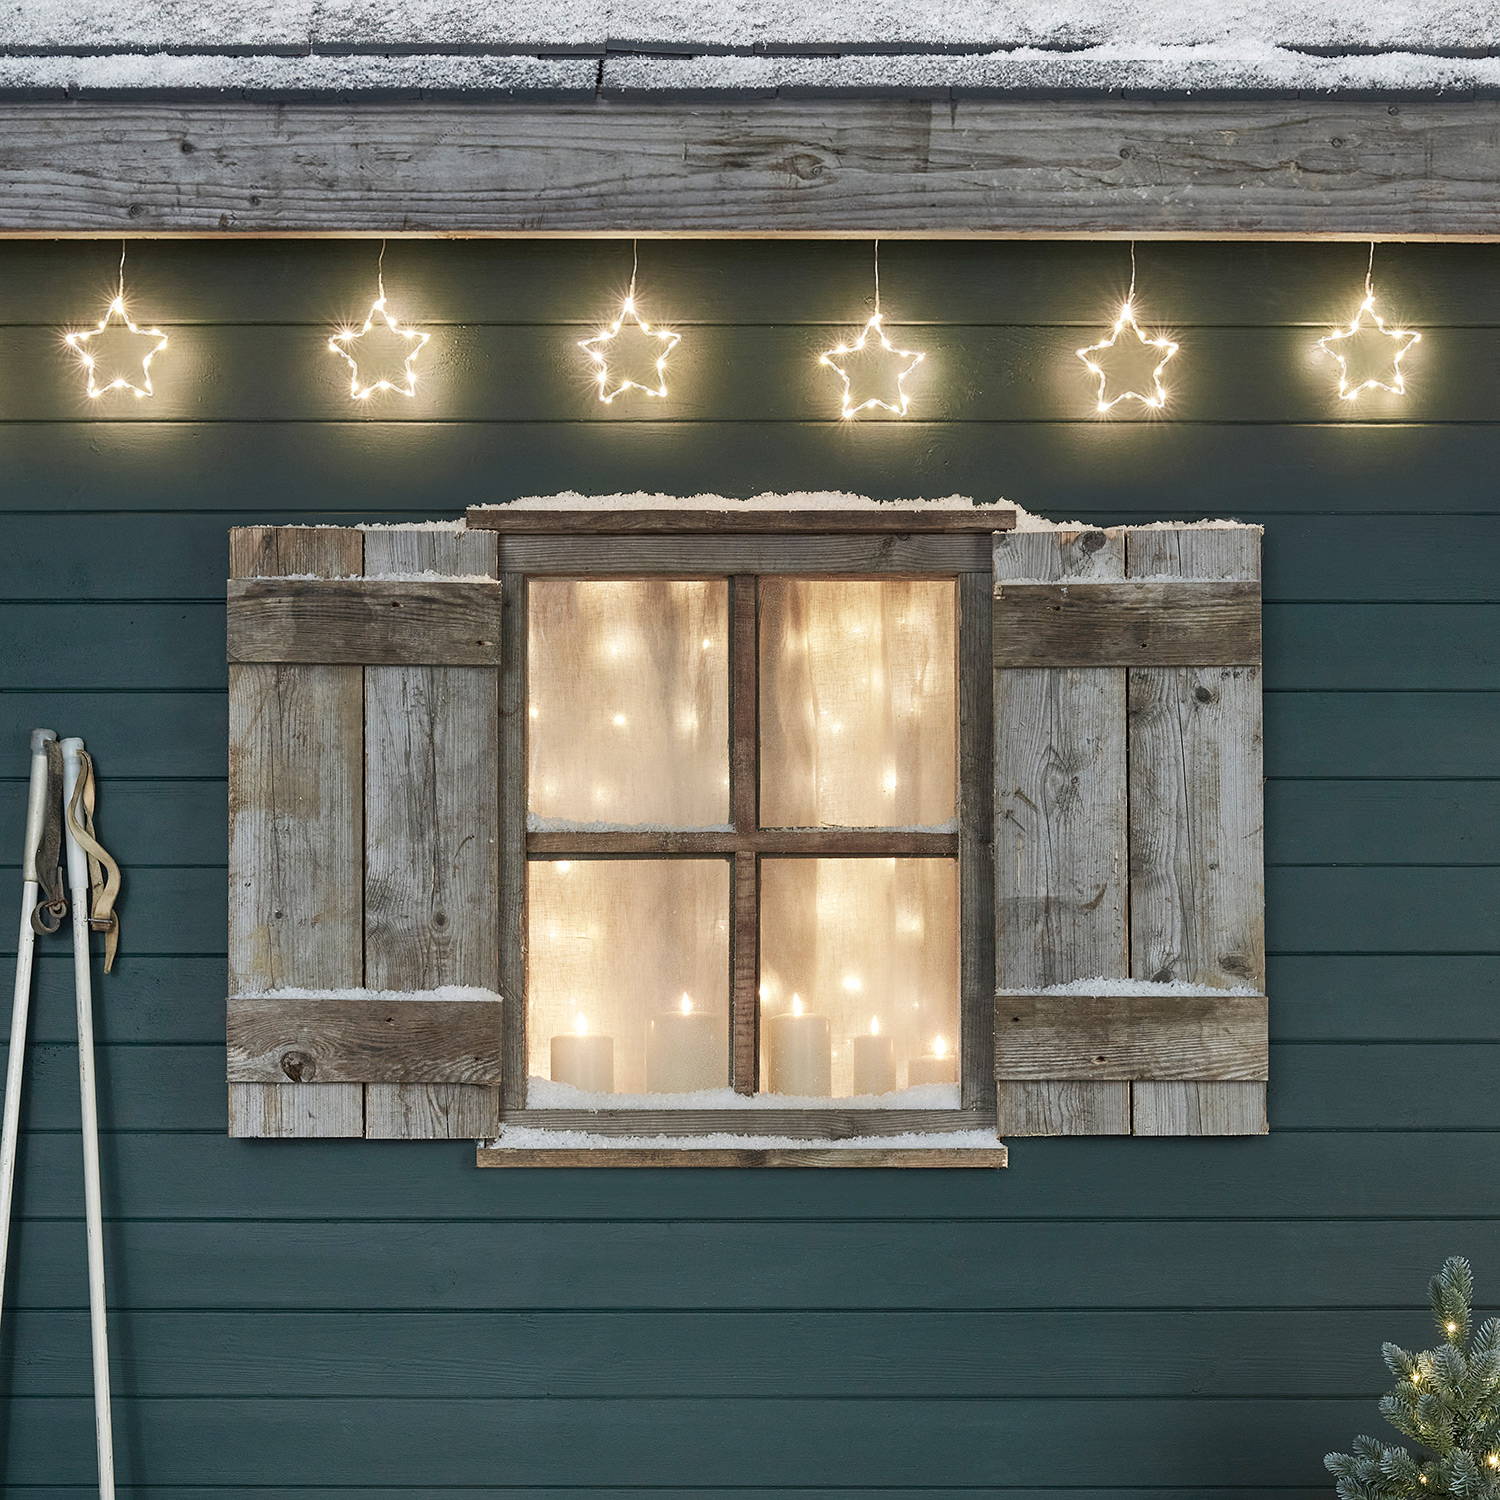 Outdoor view of a window with fairy lights inside and star curtain lights above it.